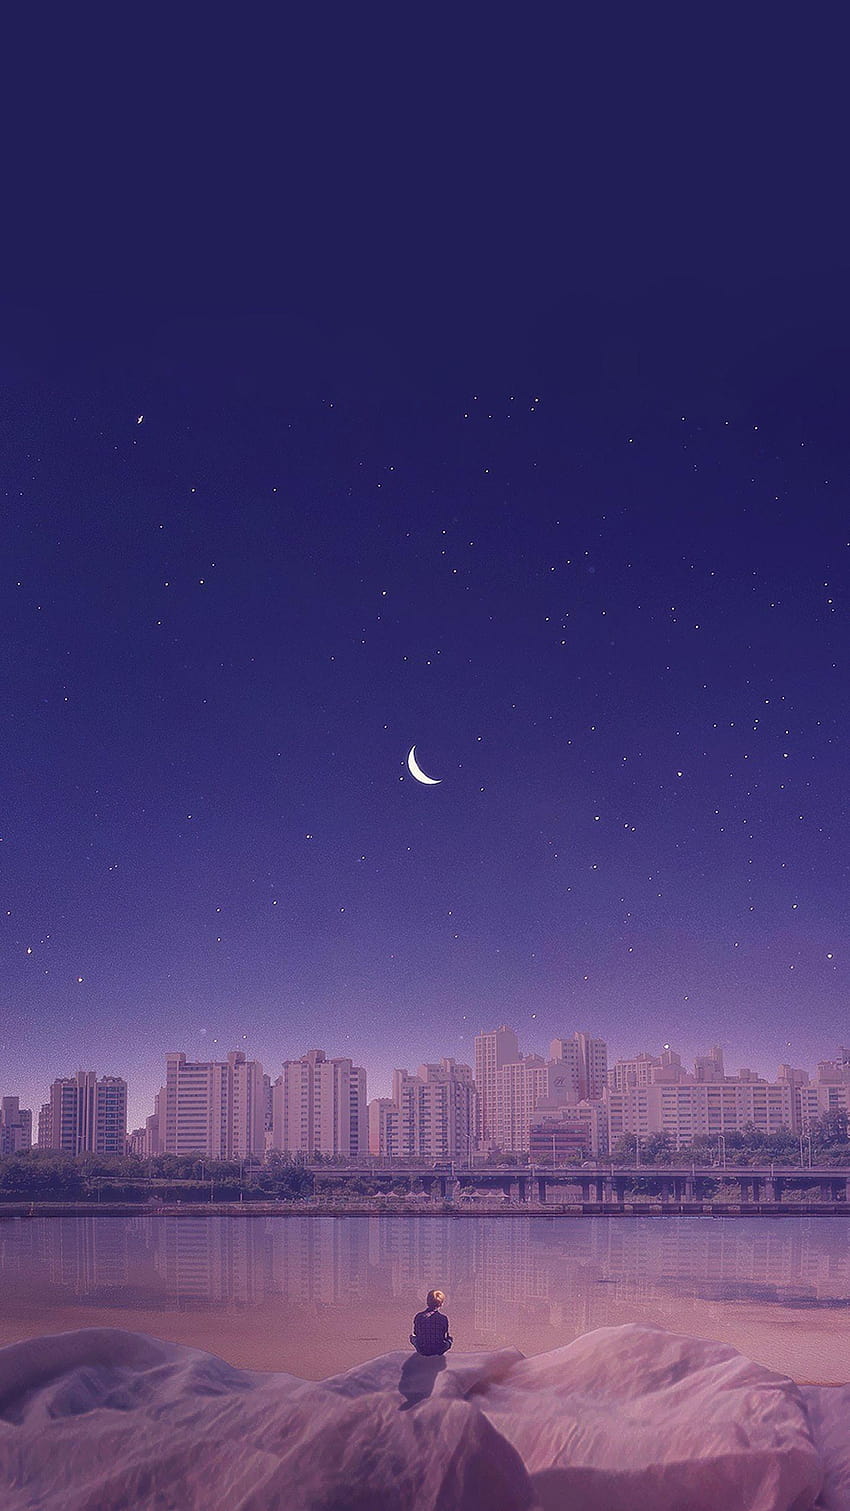 A lonely boy watch the bright moon and night city in 2019, lonely anime boy HD phone wallpaper